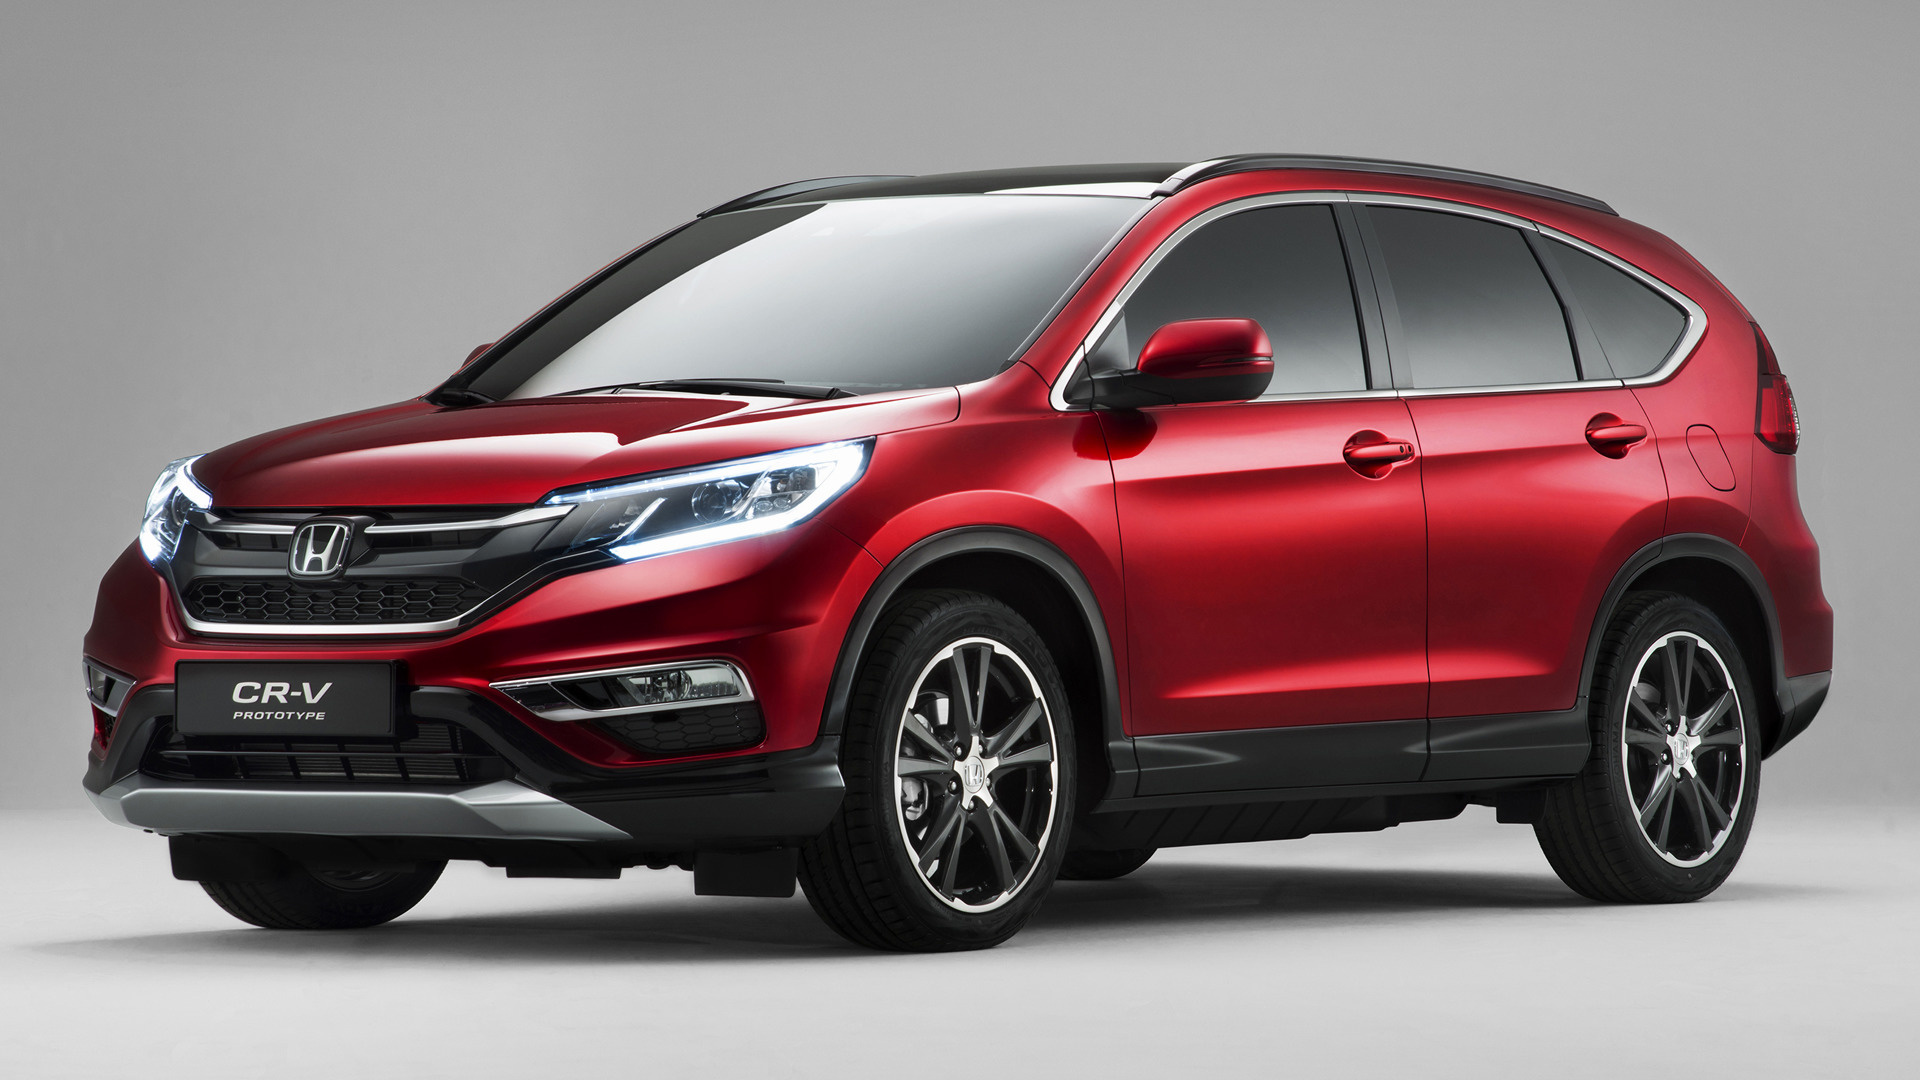 2014 Honda Cr V Prototype Wallpapers And Hd Images Car Pixel